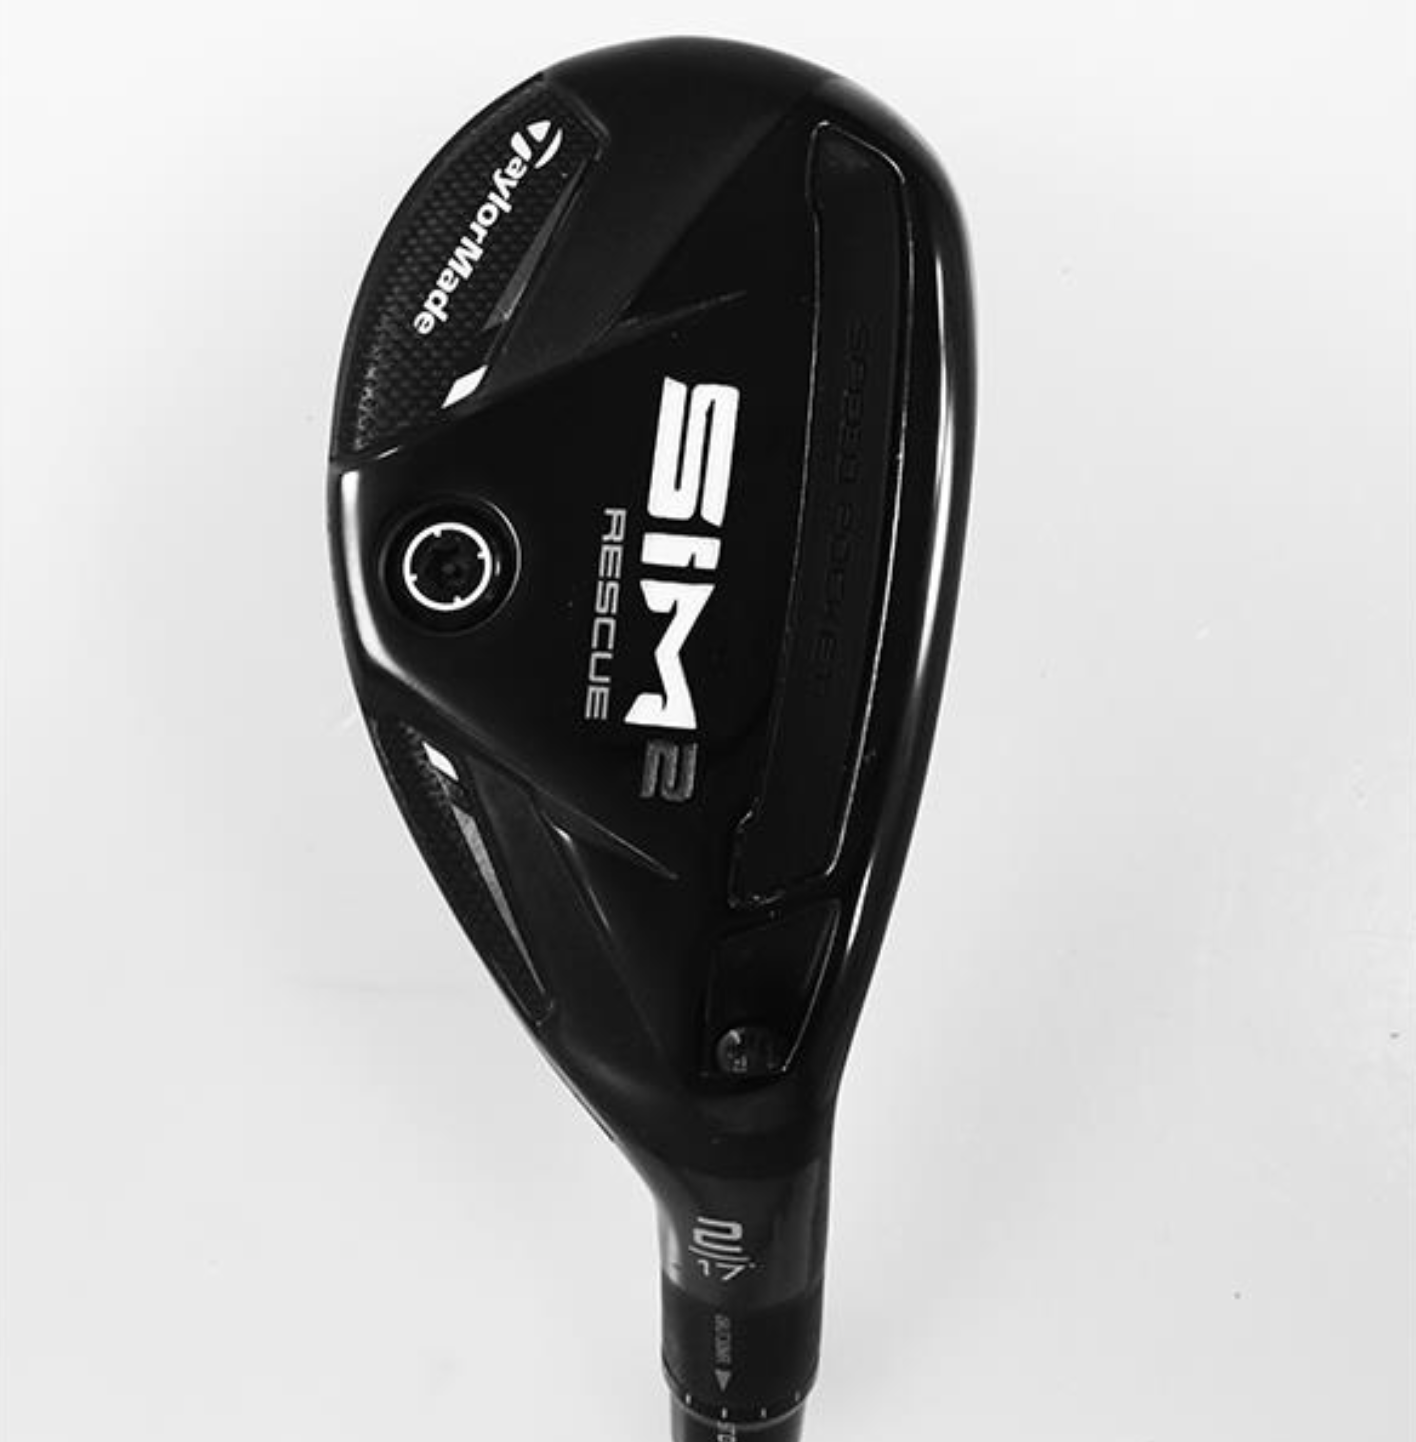 GolfWRX Spotted: TaylorMade SIM2 fairway woods and hybrids on